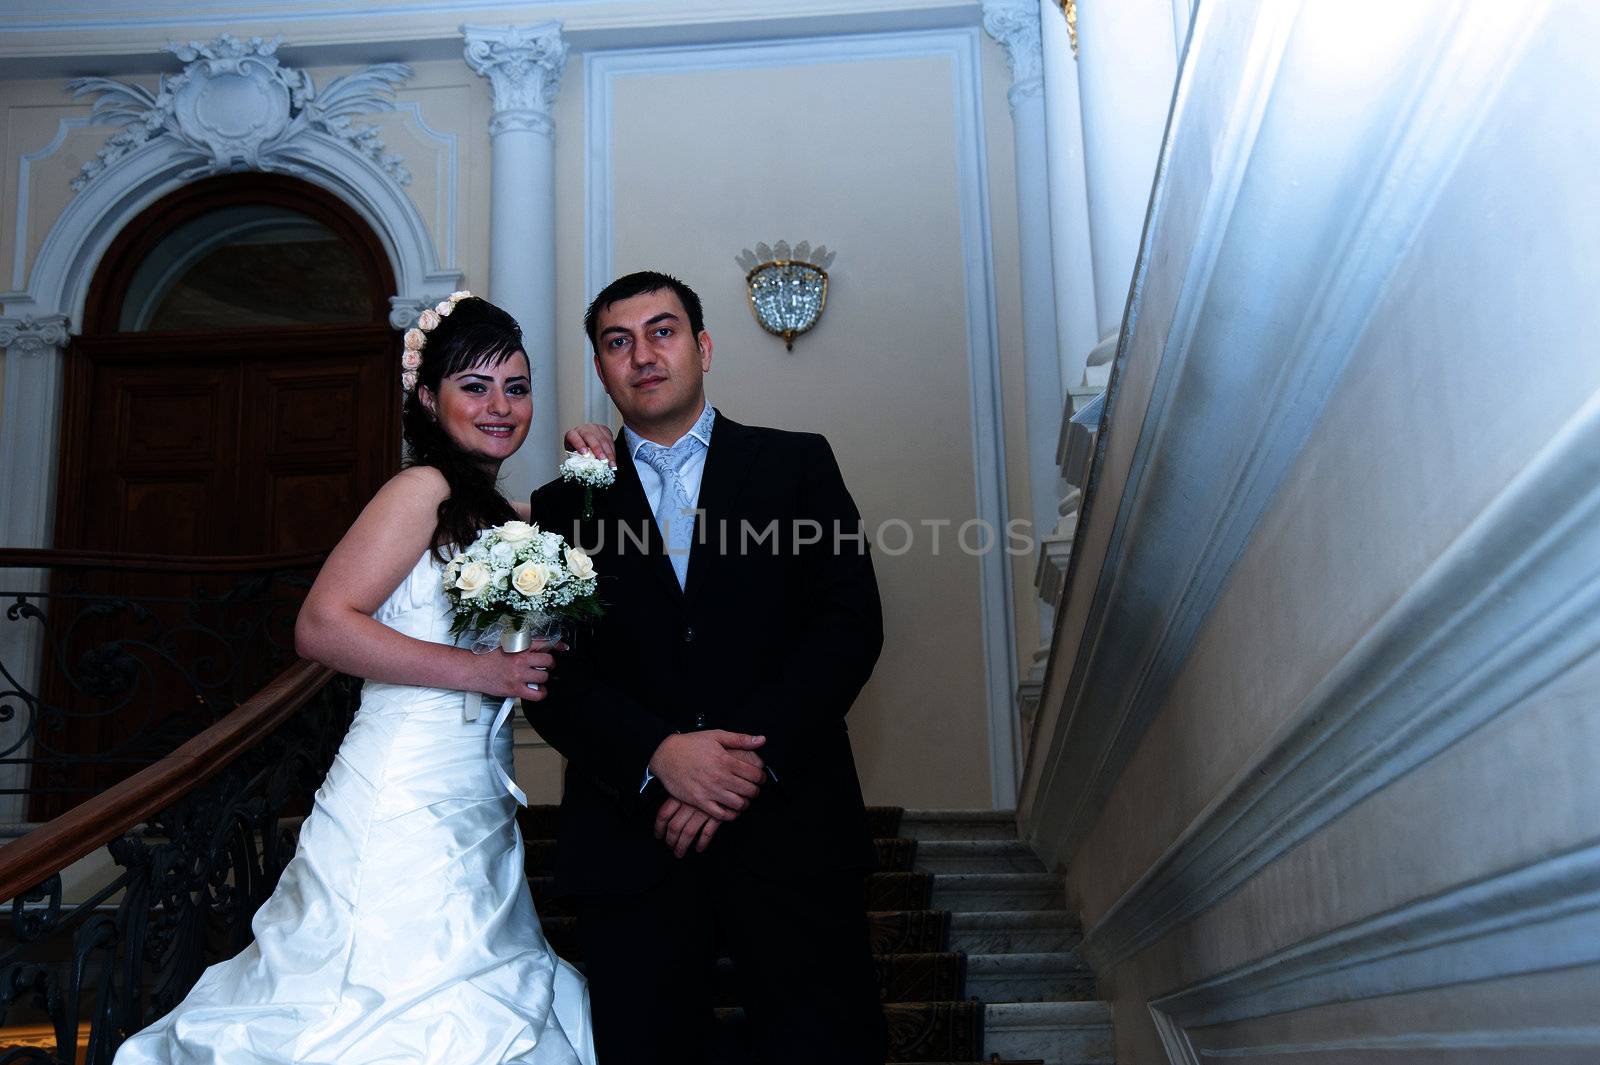  bride and groom standing on the stairs.